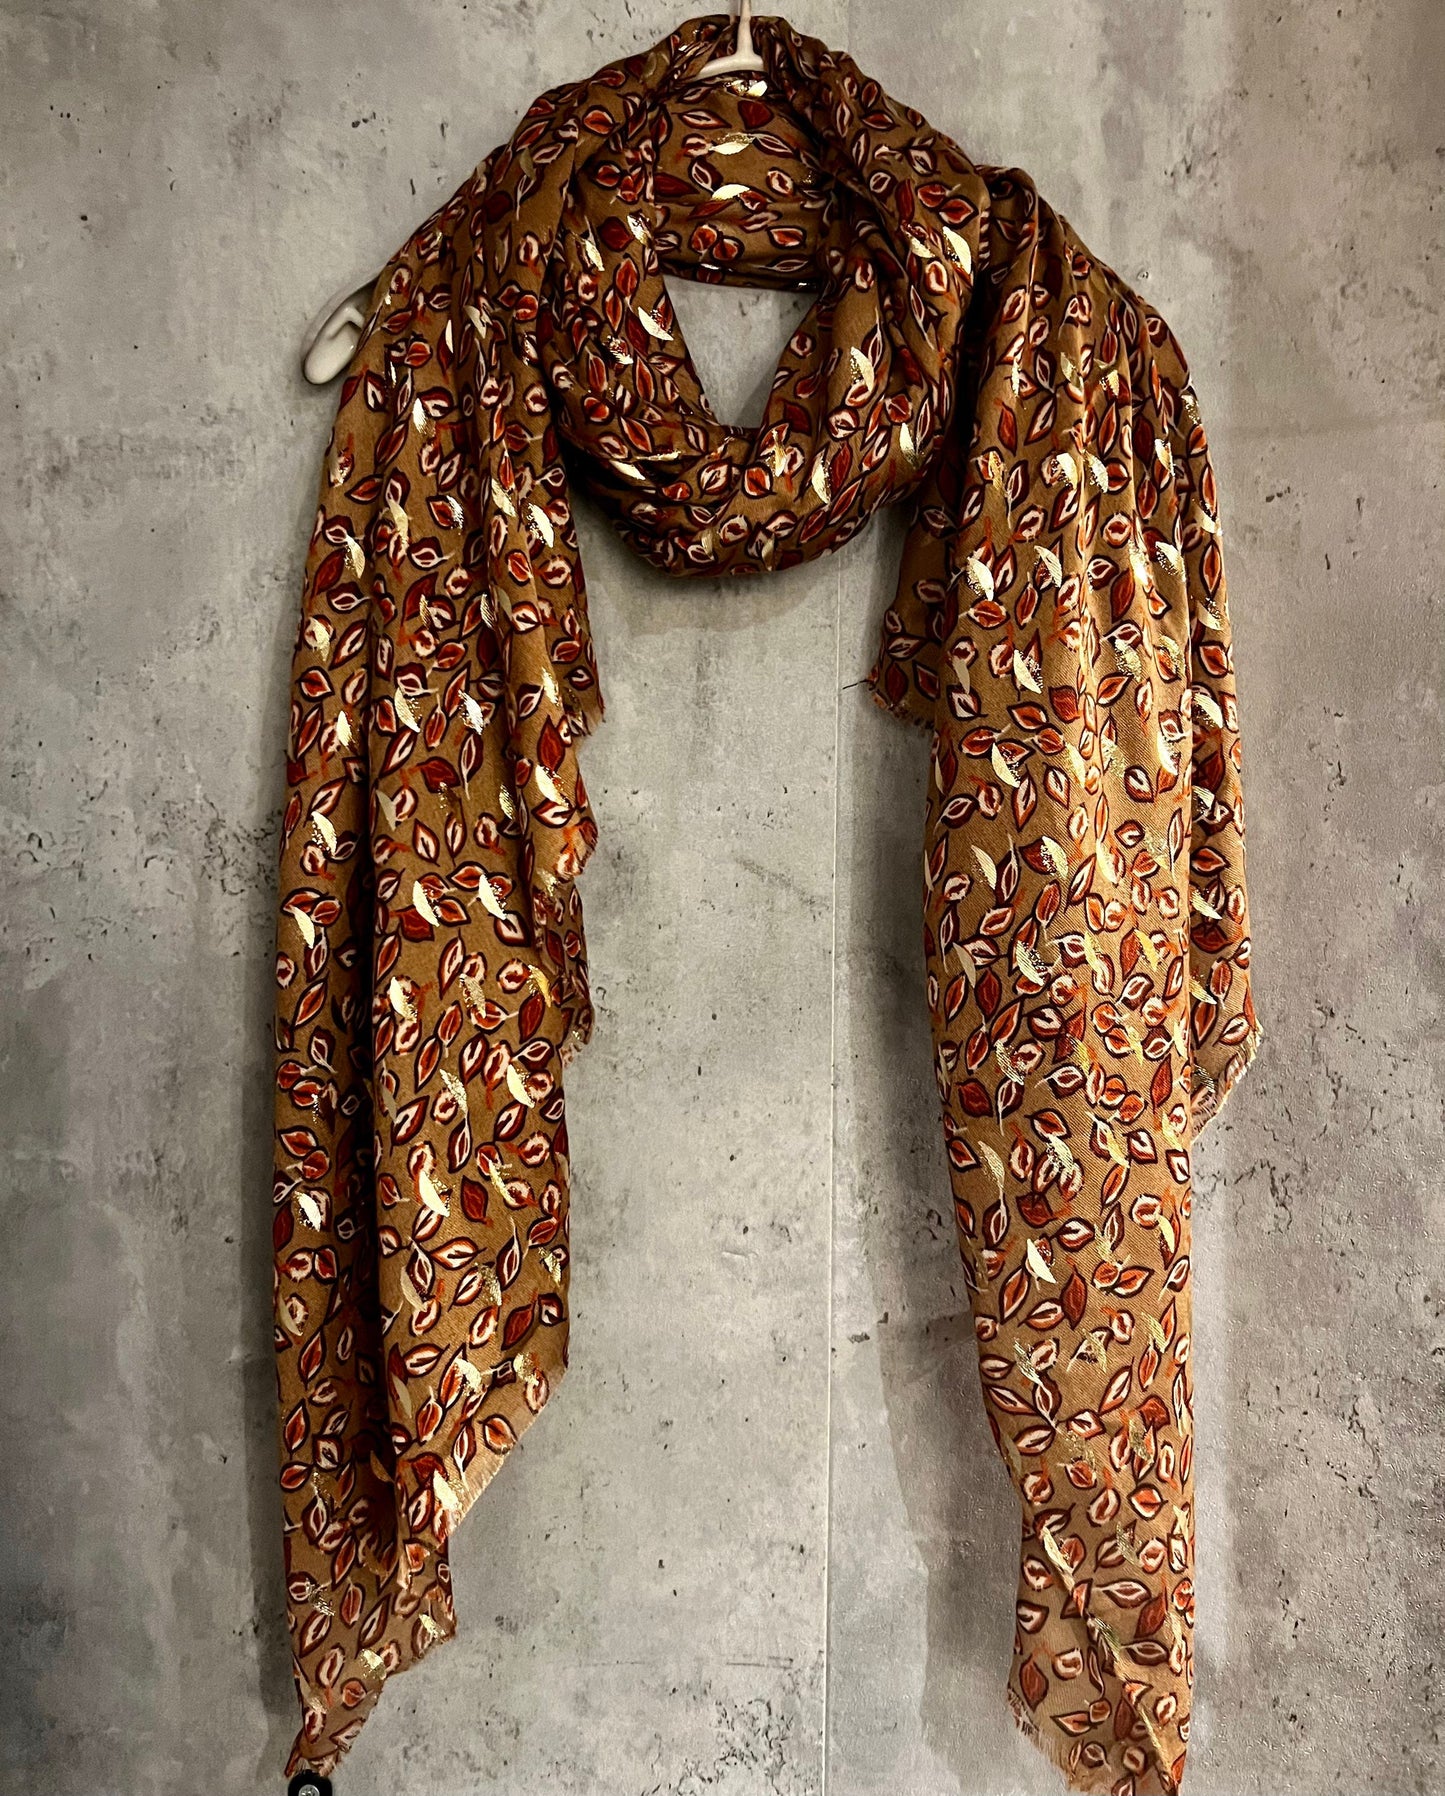 Seamless Small leaf’s With Gold Foil Brown Cotton Scarf/Summer Autumn Winter Scarf/Gifts For Mum/Gifts For Her Birthday Christmas/UK Seller